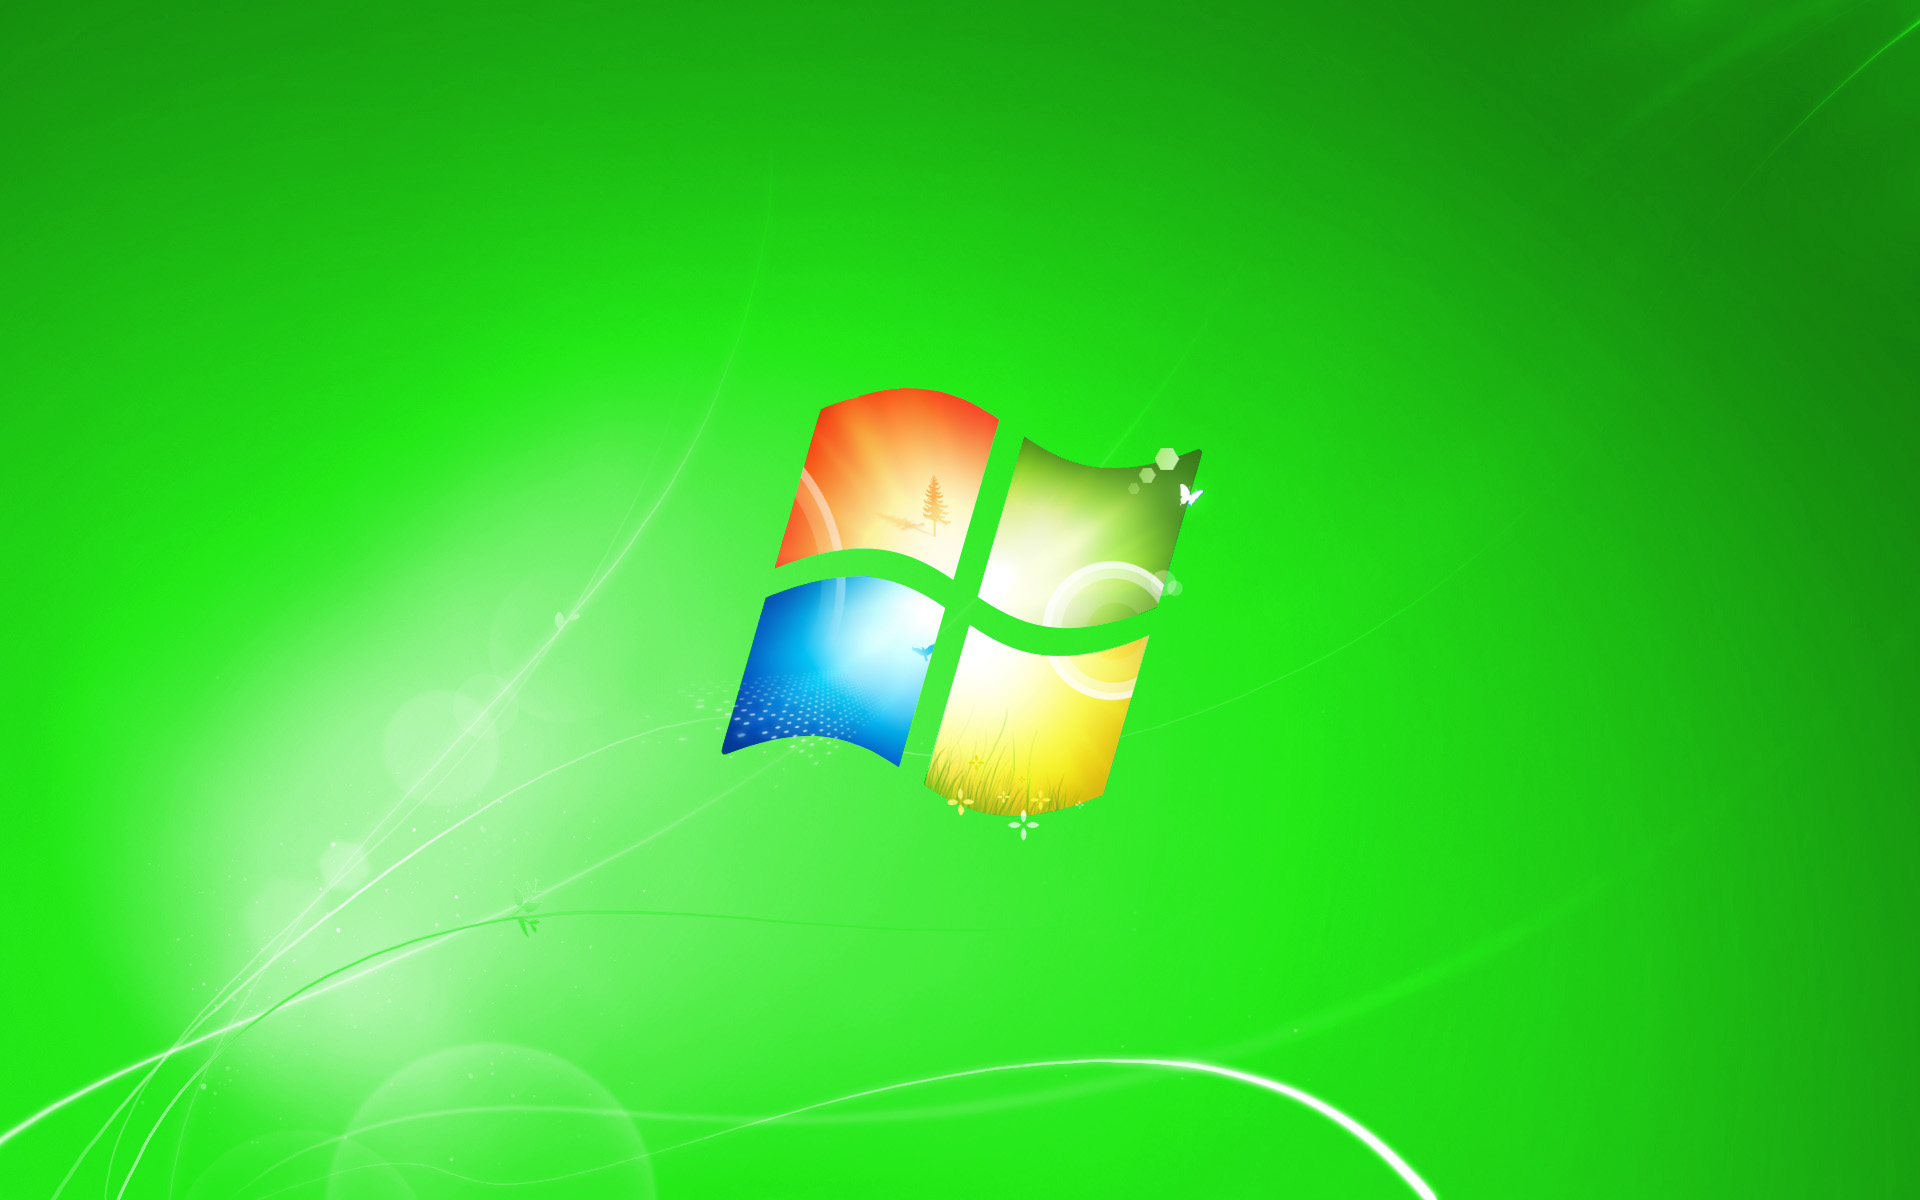 Windows wallpapers by ryanv on